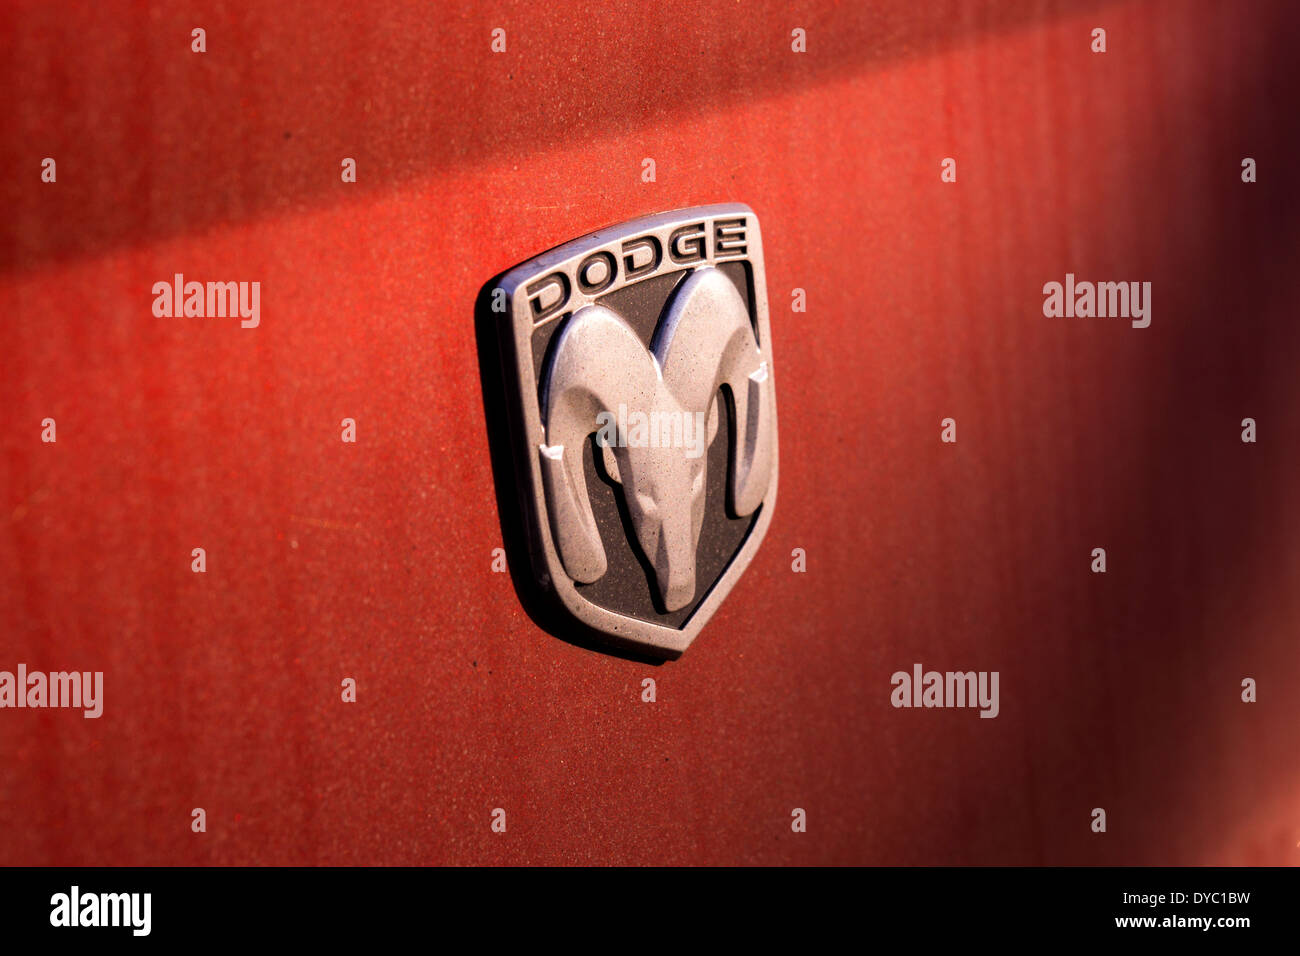 DODGE AMERICAN MUSCLE CAR LOGO, RED AMBER COLOR DRY DIRT STRIPING THE PAINT Stock Photo